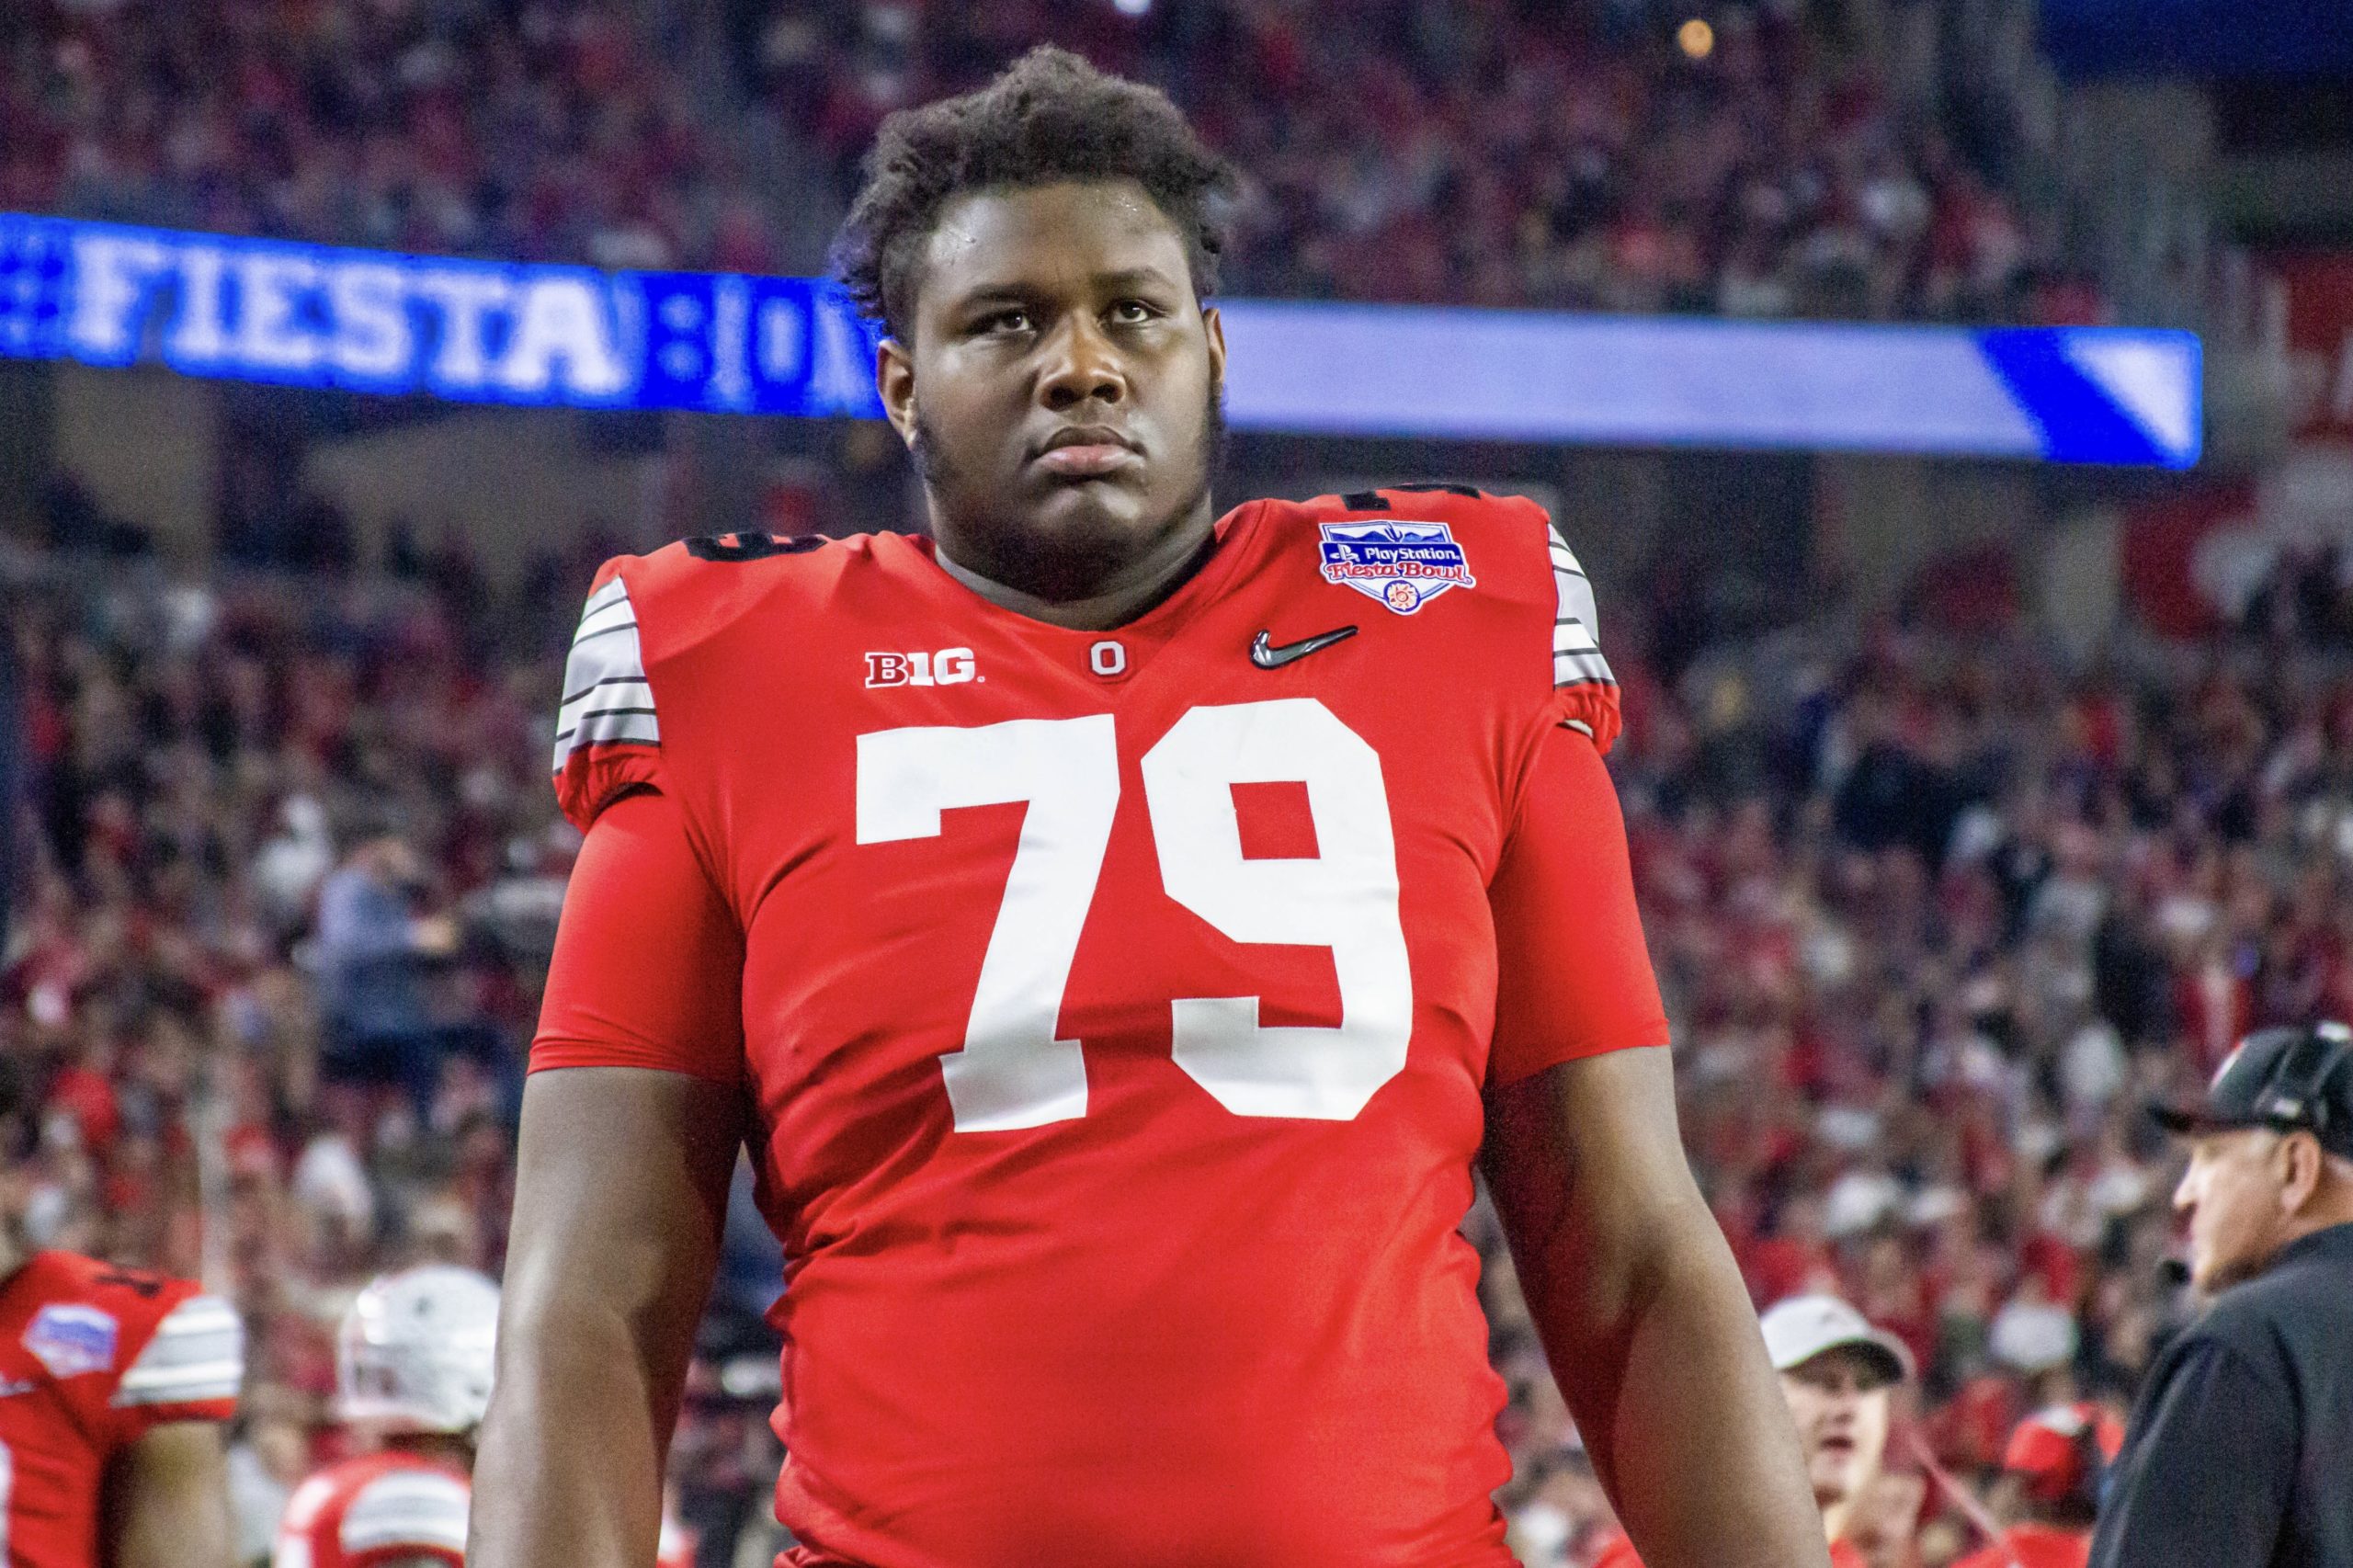 2023 NFL Draft: Dawand Jones Selected No. 111 Overall By The